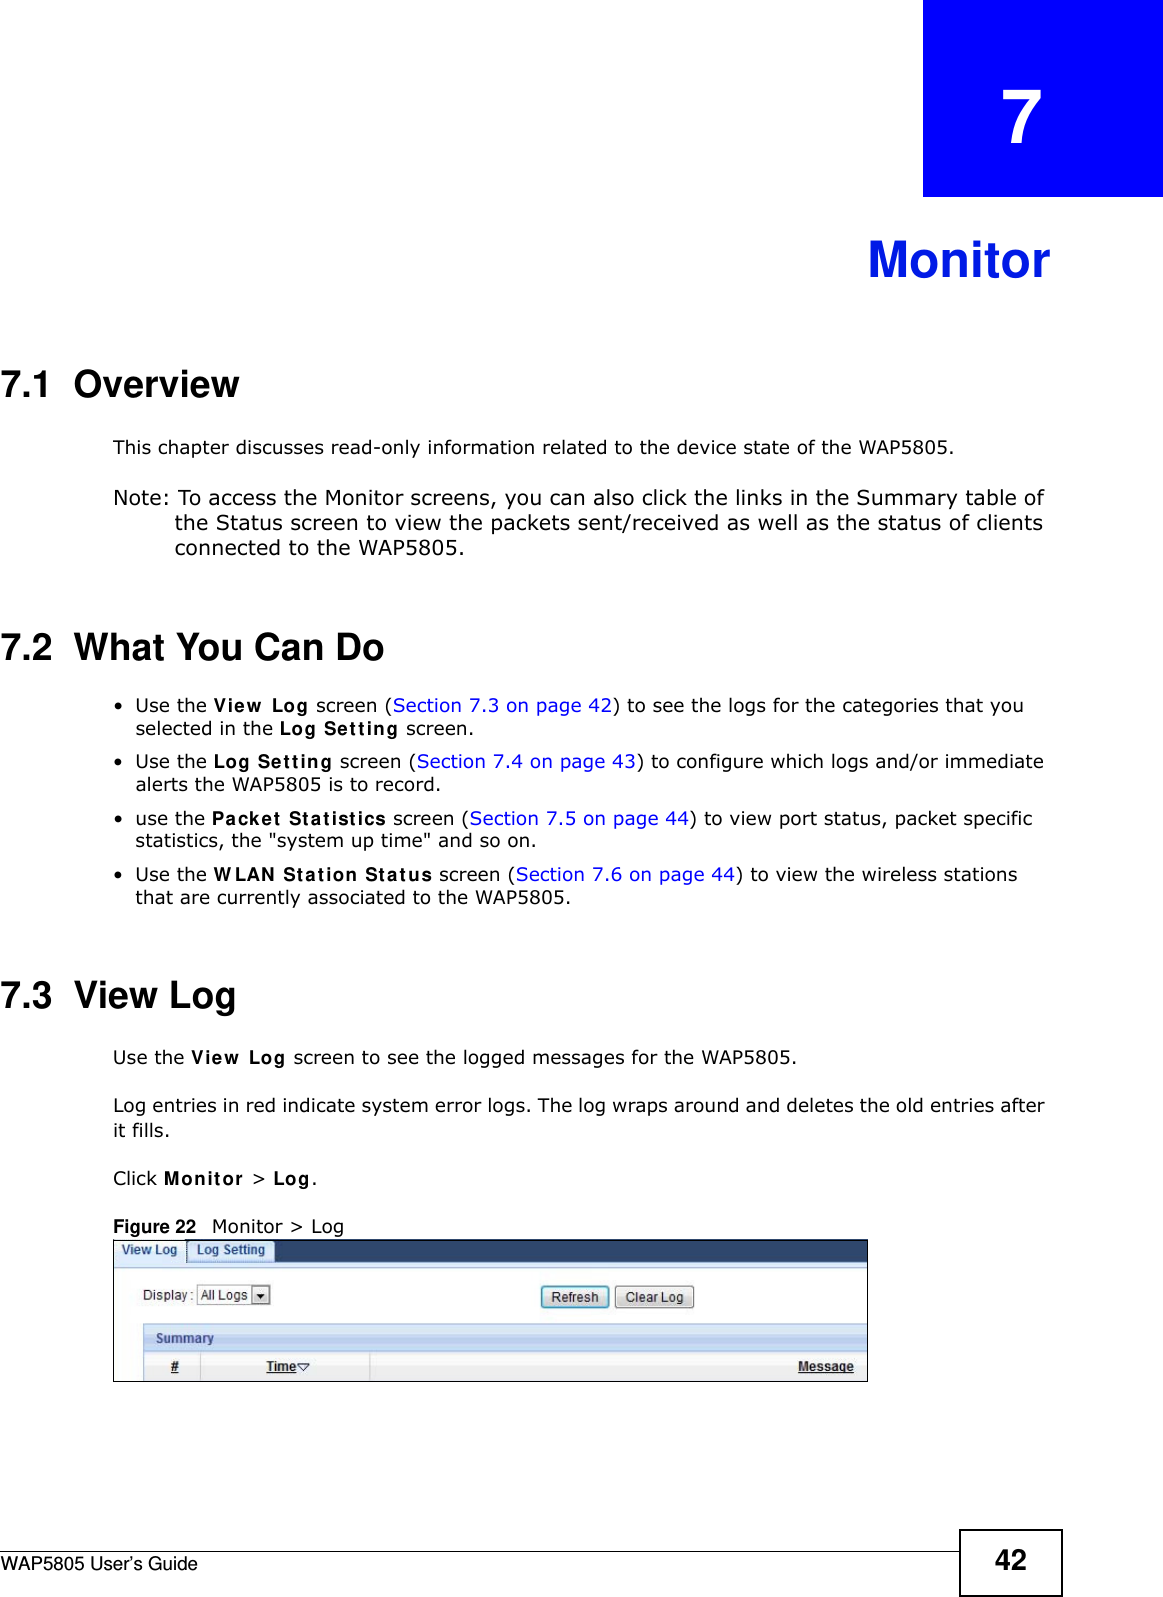 WAP5805 User’s Guide 42CHAPTER   7Monitor7.1  OverviewThis chapter discusses read-only information related to the device state of the WAP5805. Note: To access the Monitor screens, you can also click the links in the Summary table of the Status screen to view the packets sent/received as well as the status of clients connected to the WAP5805.7.2  What You Can Do•Use the View Log screen (Section 7.3 on page 42) to see the logs for the categories that you selected in the Log Setting screen.•Use the Log Setting screen (Section 7.4 on page 43) to configure which logs and/or immediate alerts the WAP5805 is to record.•use the Packet Statistics screen (Section 7.5 on page 44) to view port status, packet specific statistics, the &quot;system up time&quot; and so on.•Use the WLAN Station Status screen (Section 7.6 on page 44) to view the wireless stations that are currently associated to the WAP5805.7.3  View LogUse the View Log screen to see the logged messages for the WAP5805. Log entries in red indicate system error logs. The log wraps around and deletes the old entries after it fills. Click Monitor &gt; Log.Figure 22   Monitor &gt; Log 